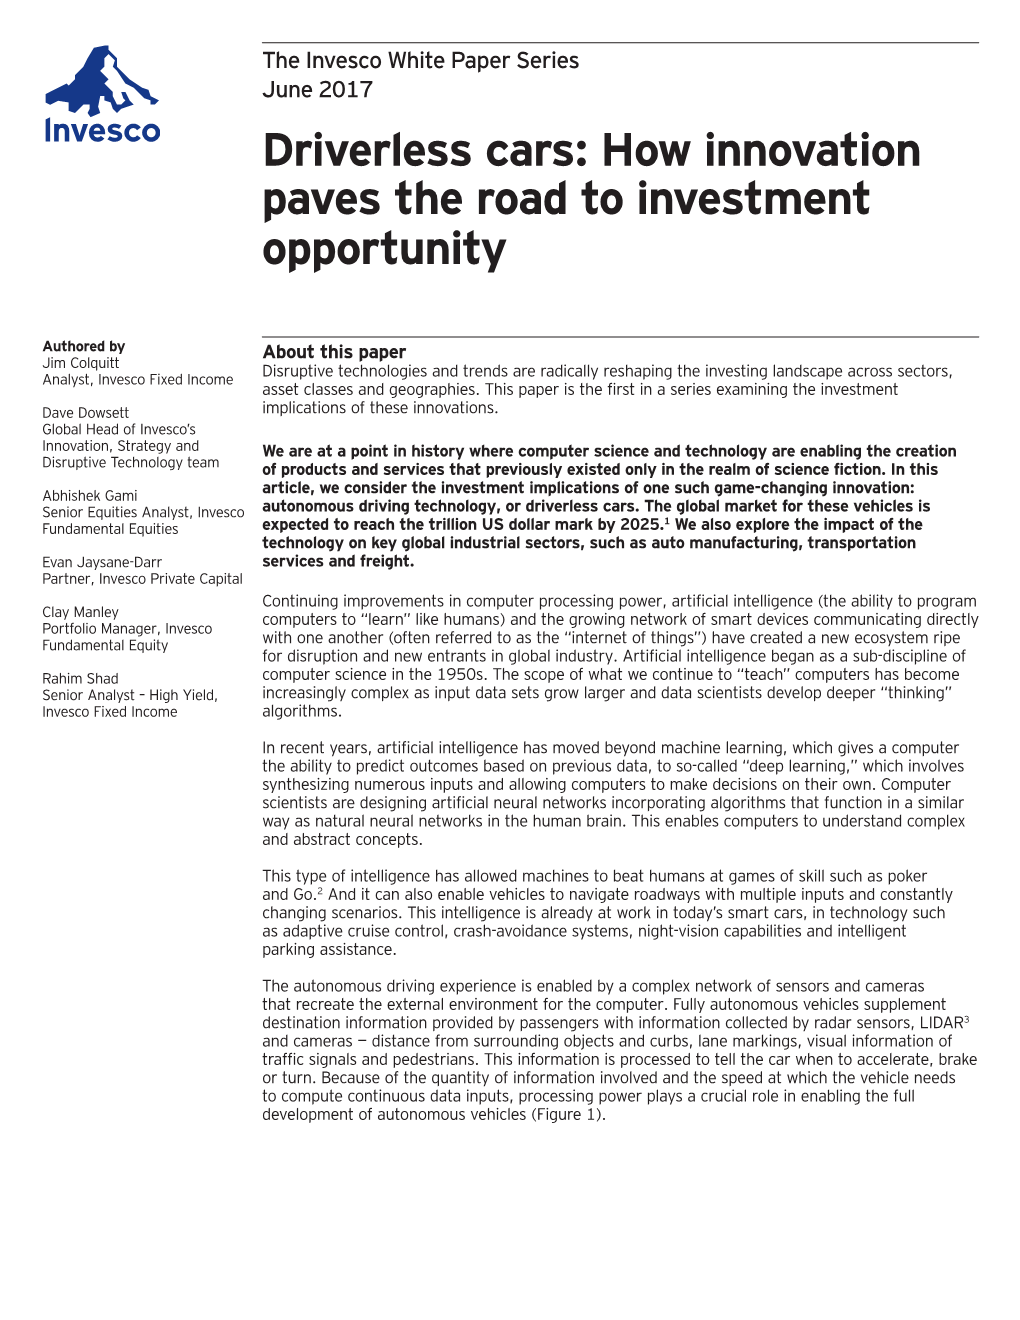 Driverless Cars: How Innovation Paves the Road to Investment Opportunity